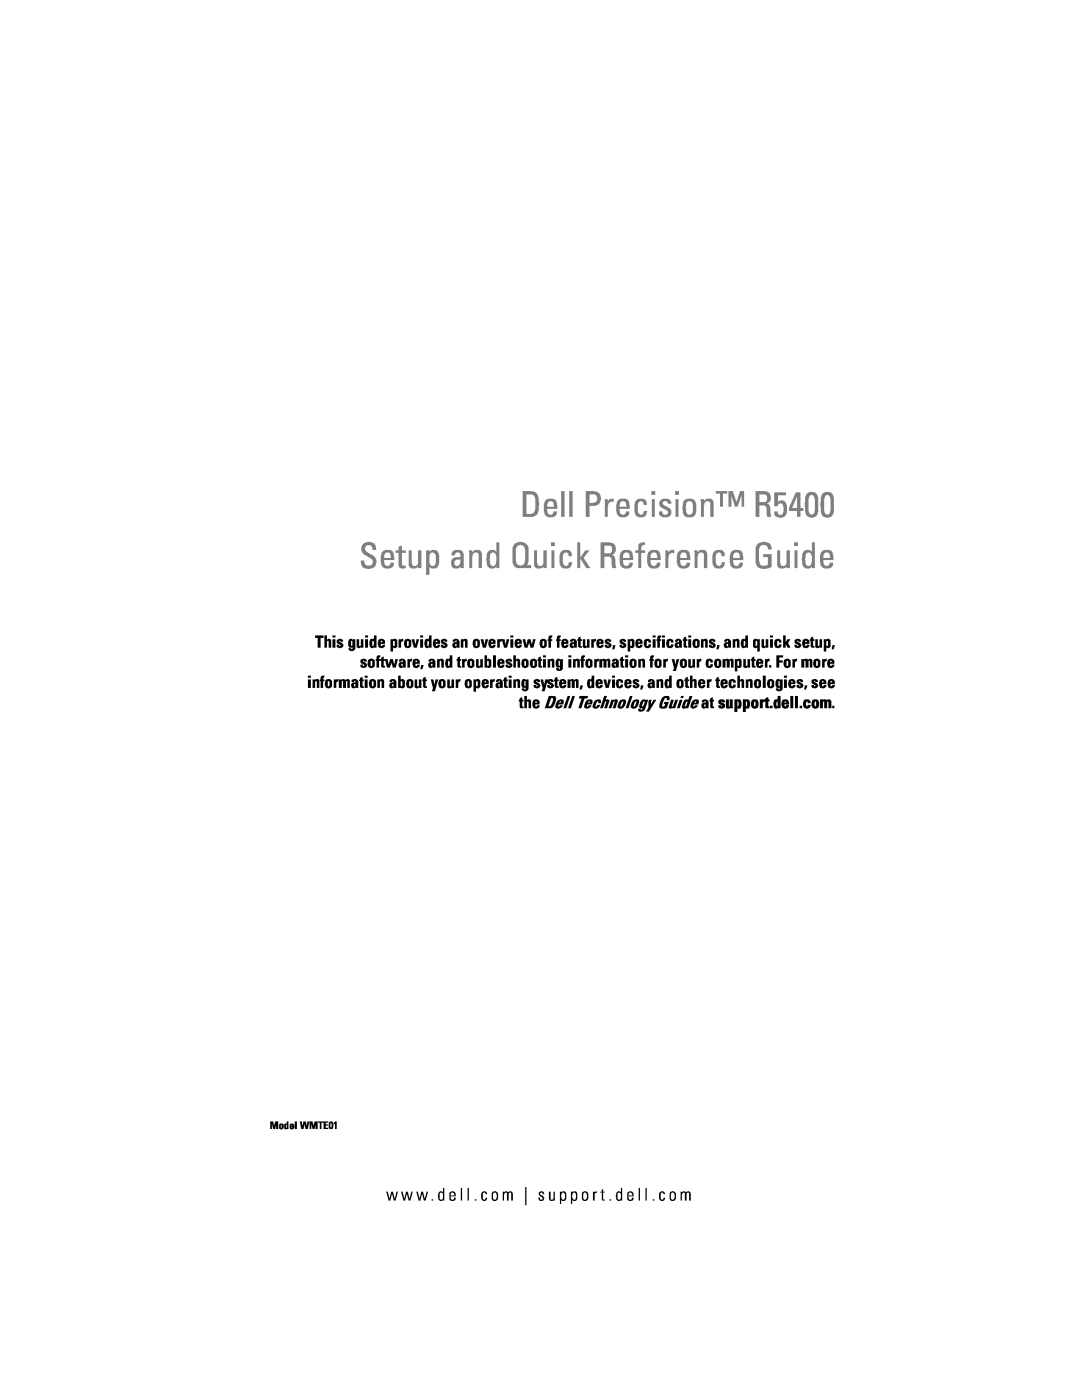 Dell WMTE01, KR019 specifications Dell Precision R5400 Setup and Quick Reference Guide 